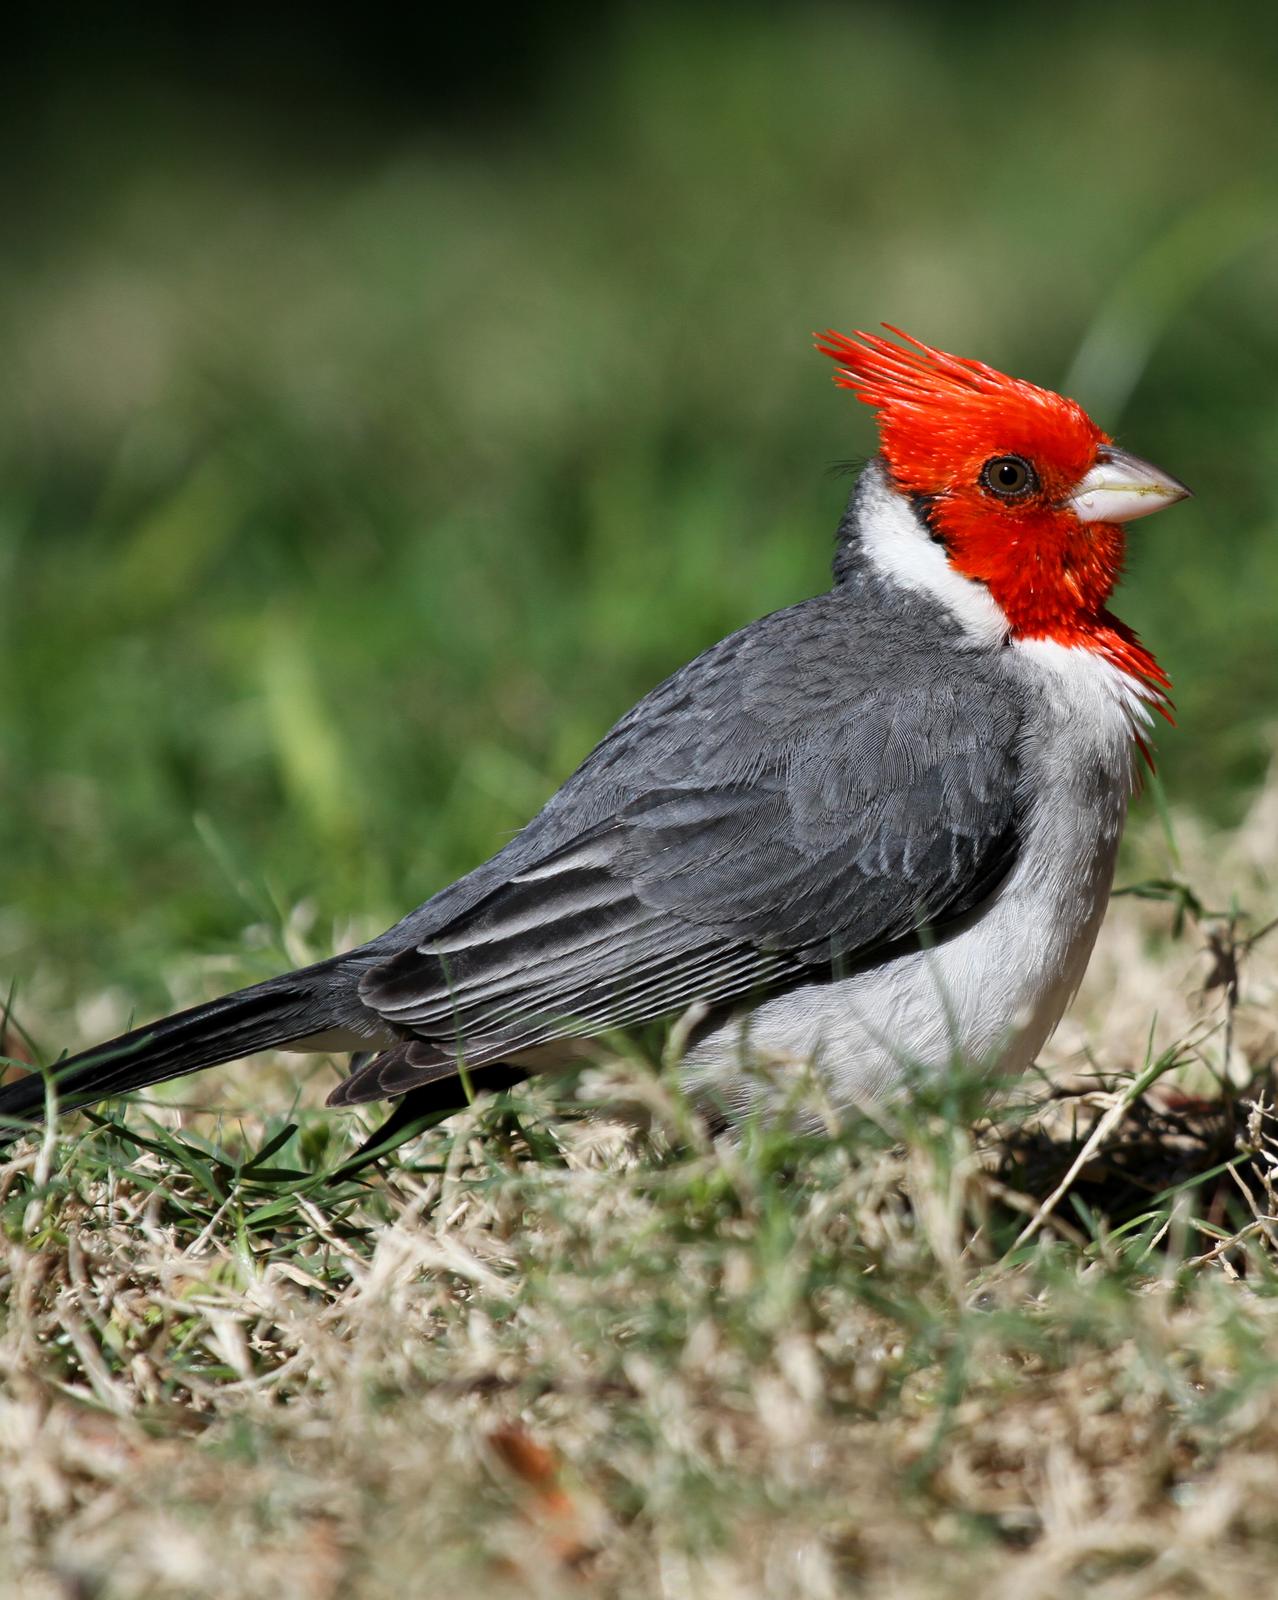 Red-crested Cardinal Photo by Matthew Grube